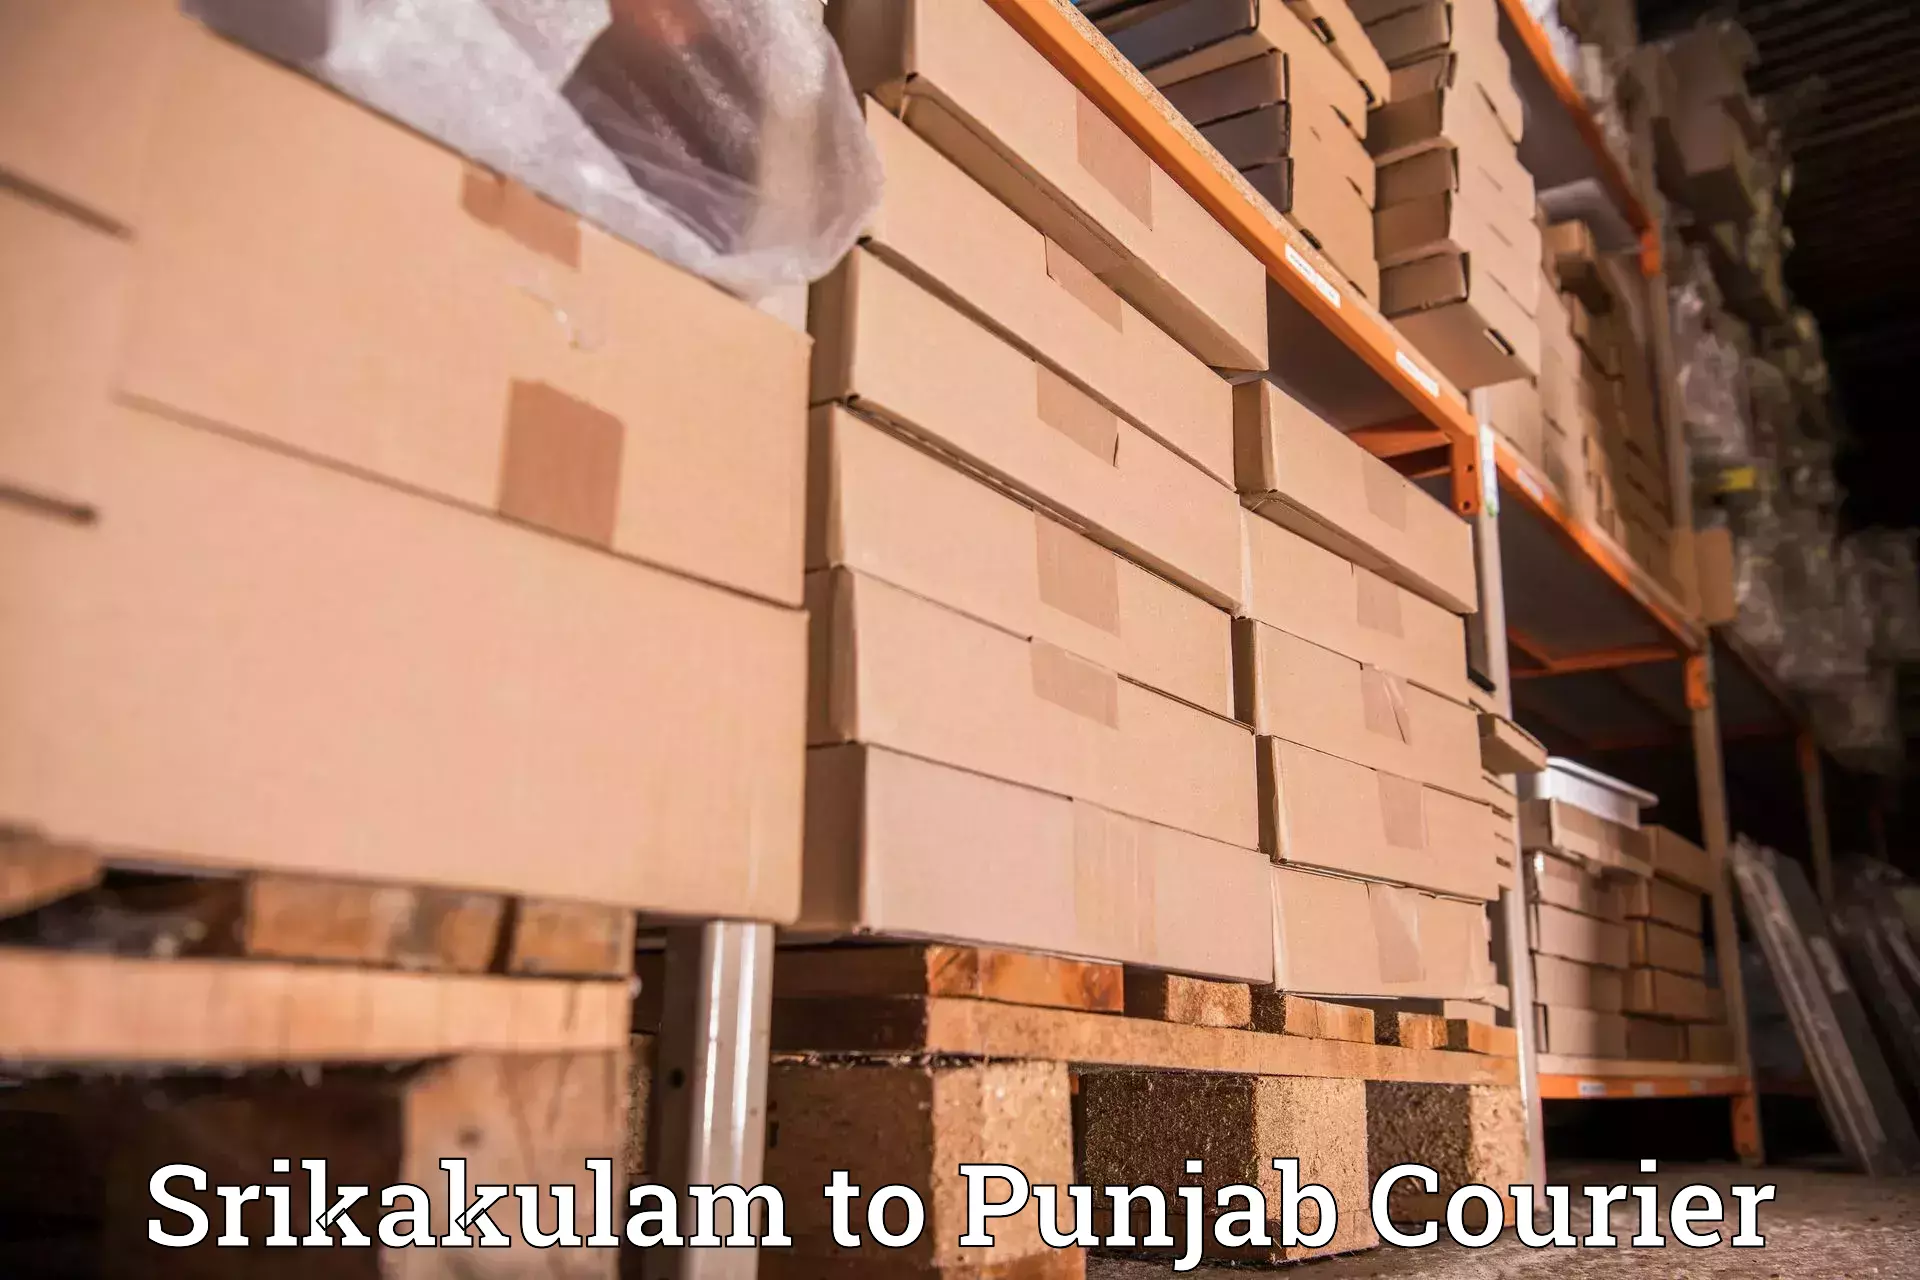 Courier service booking in Srikakulam to Bathinda